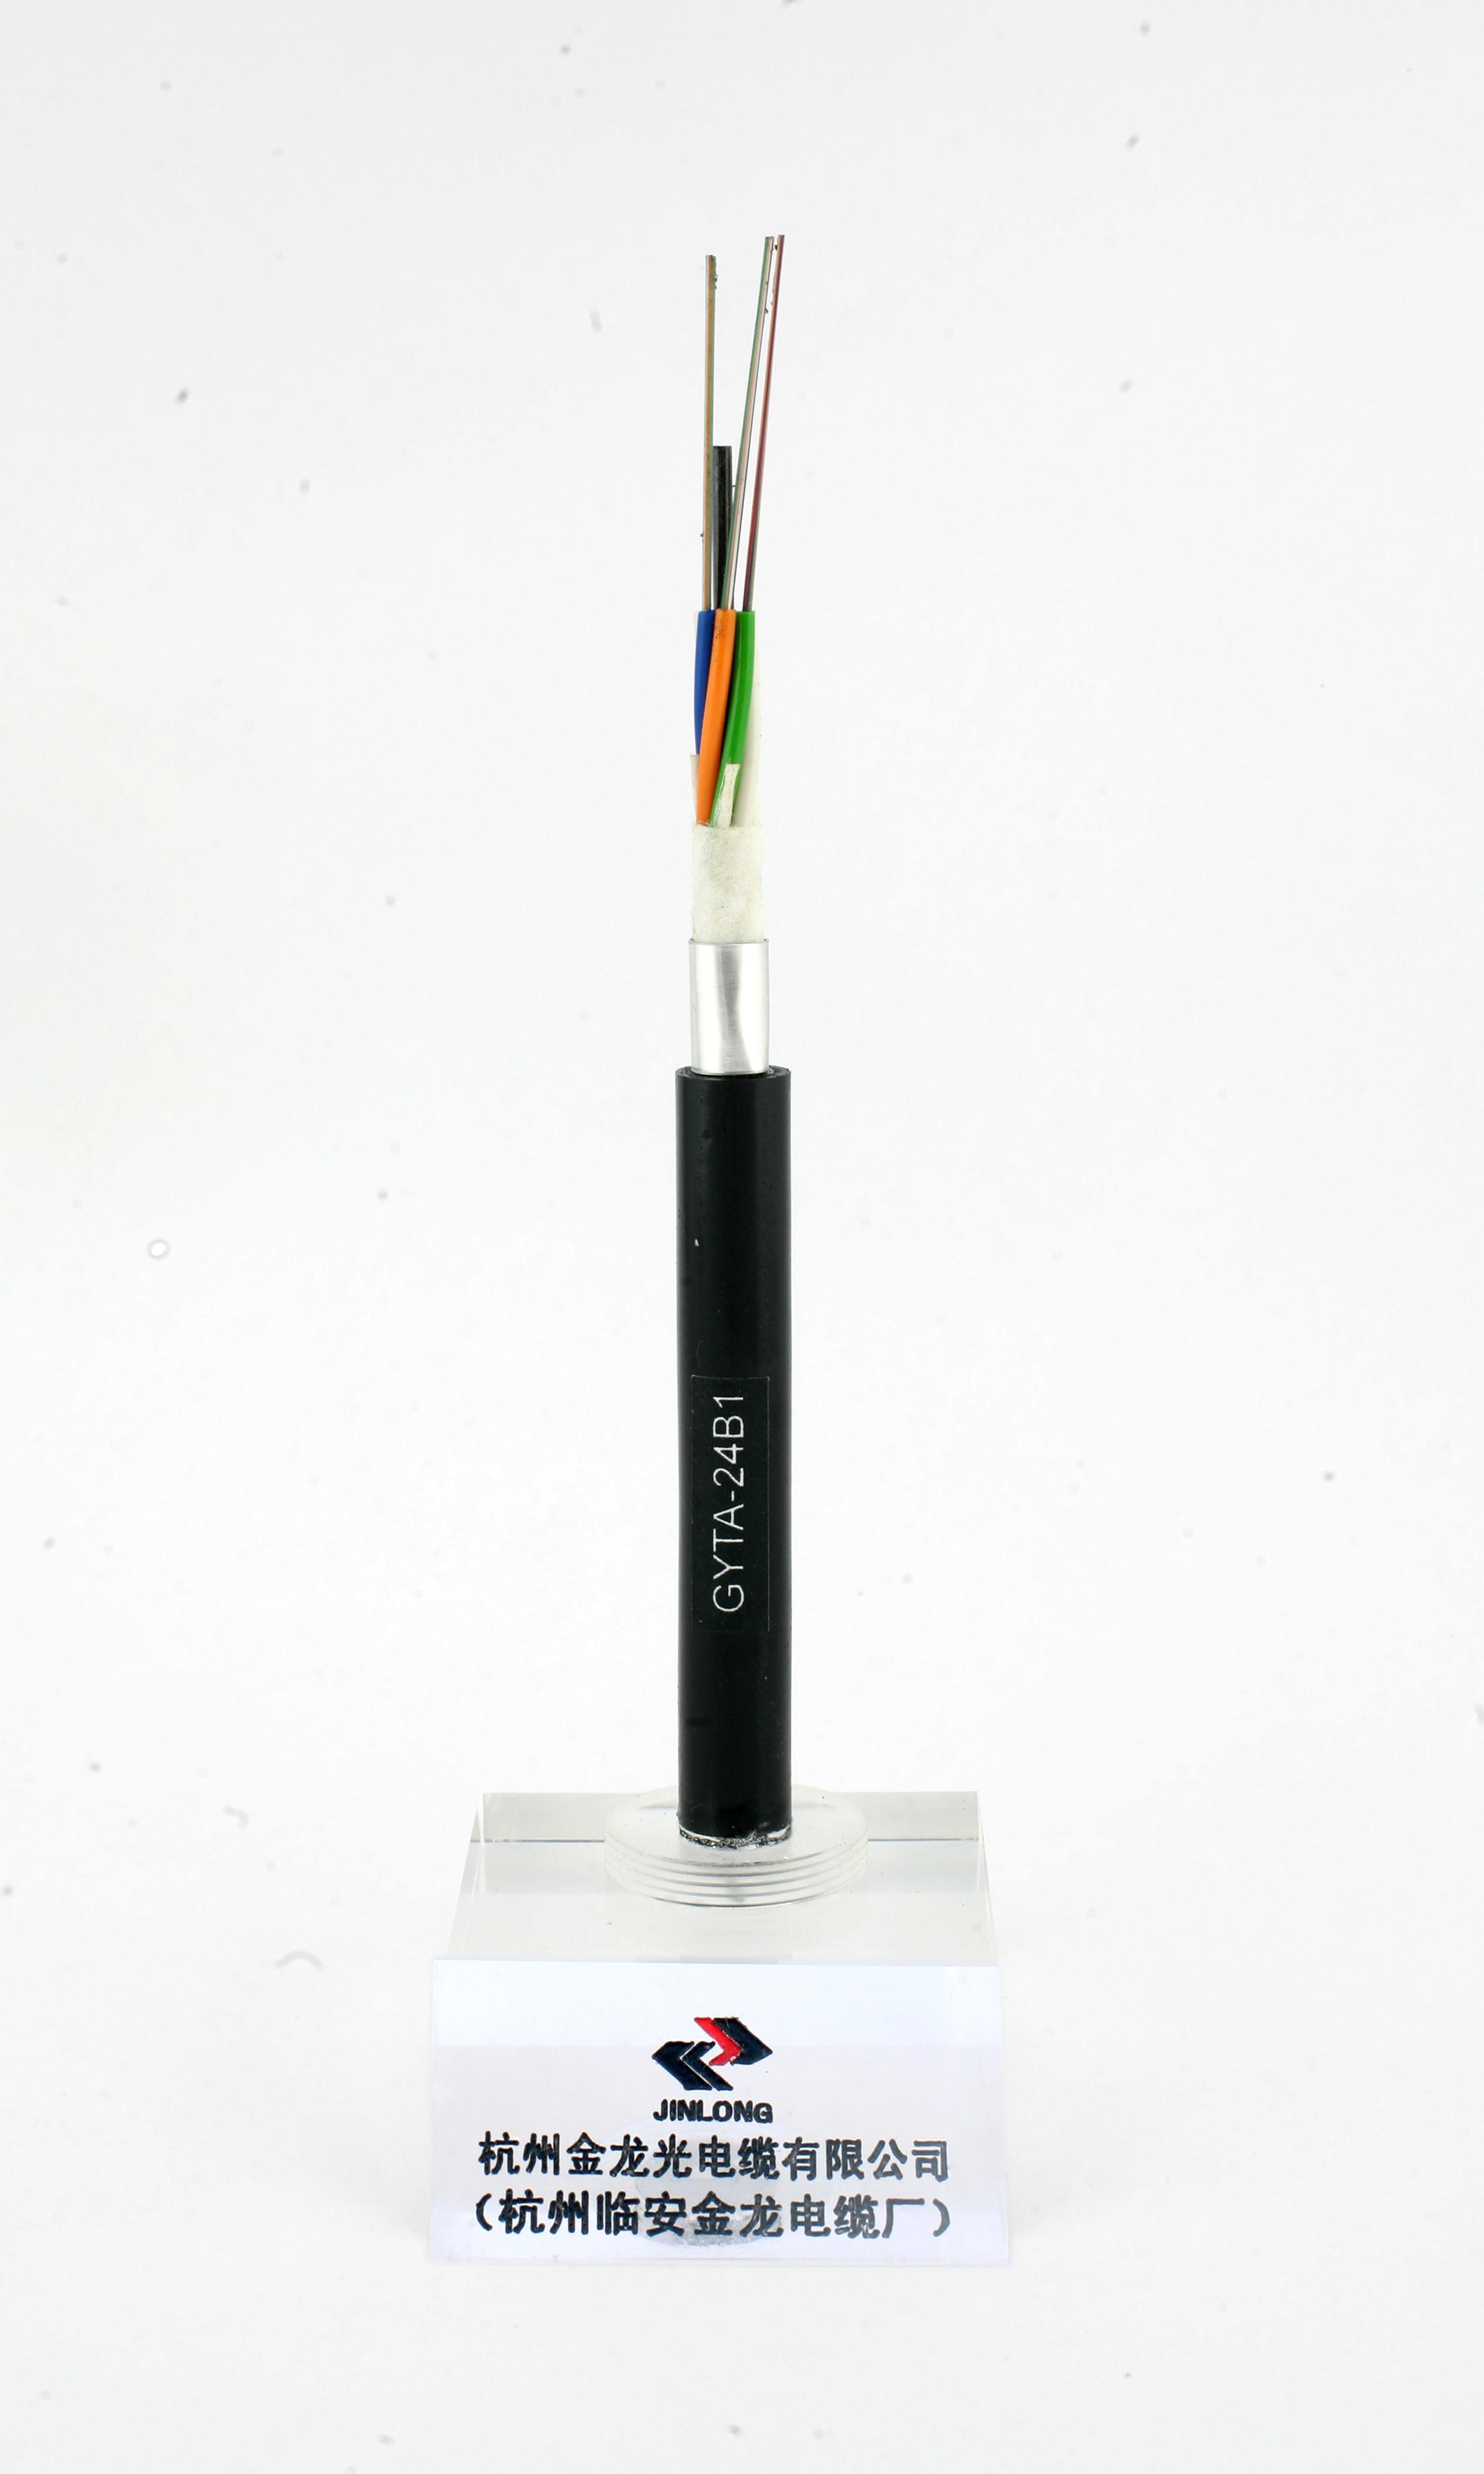 Gysta Duct and Aerial Single Mode Optical Fiber Cable